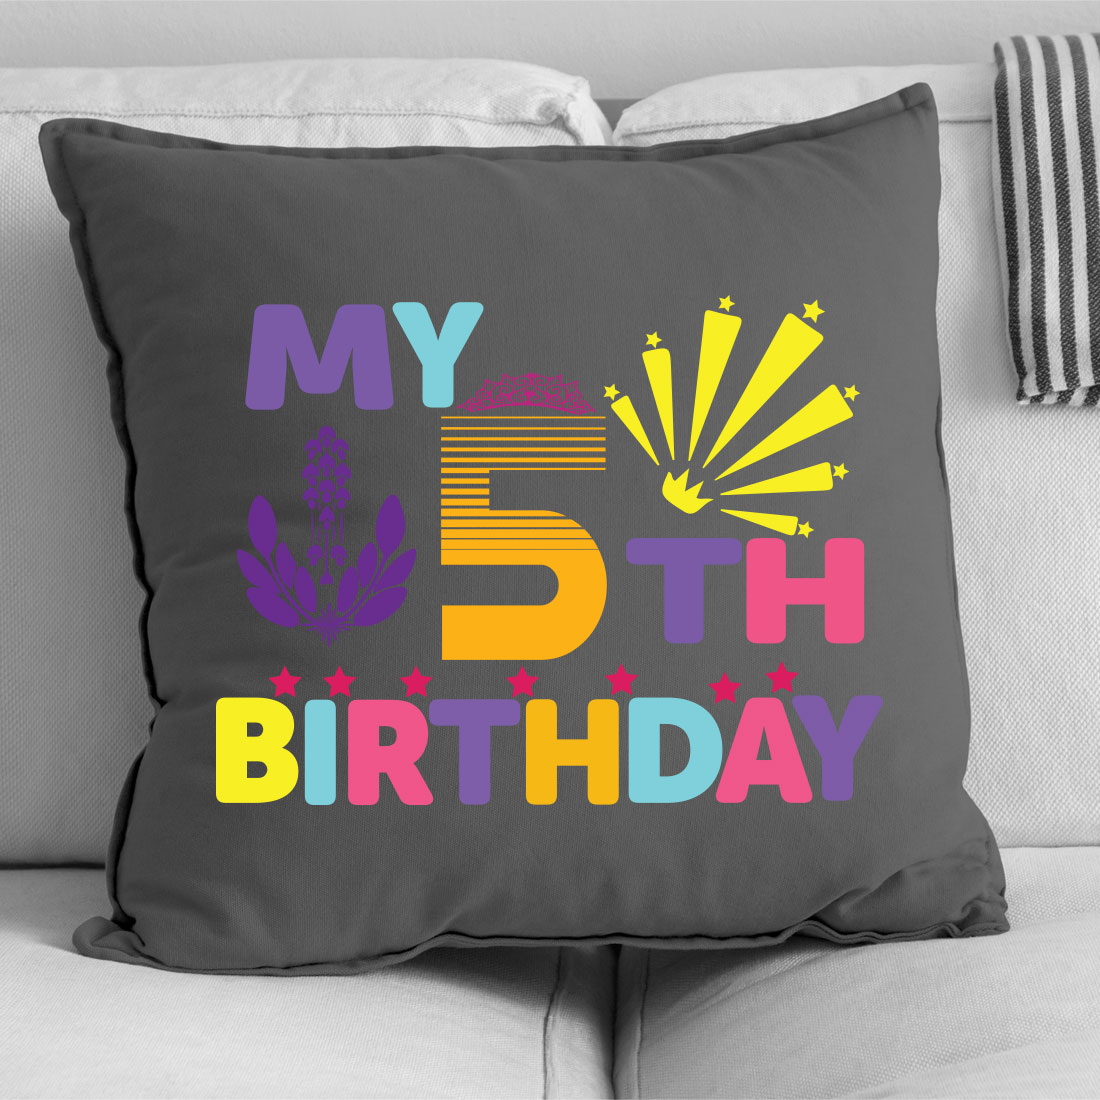 Pillow that says my 5th birthday on it.